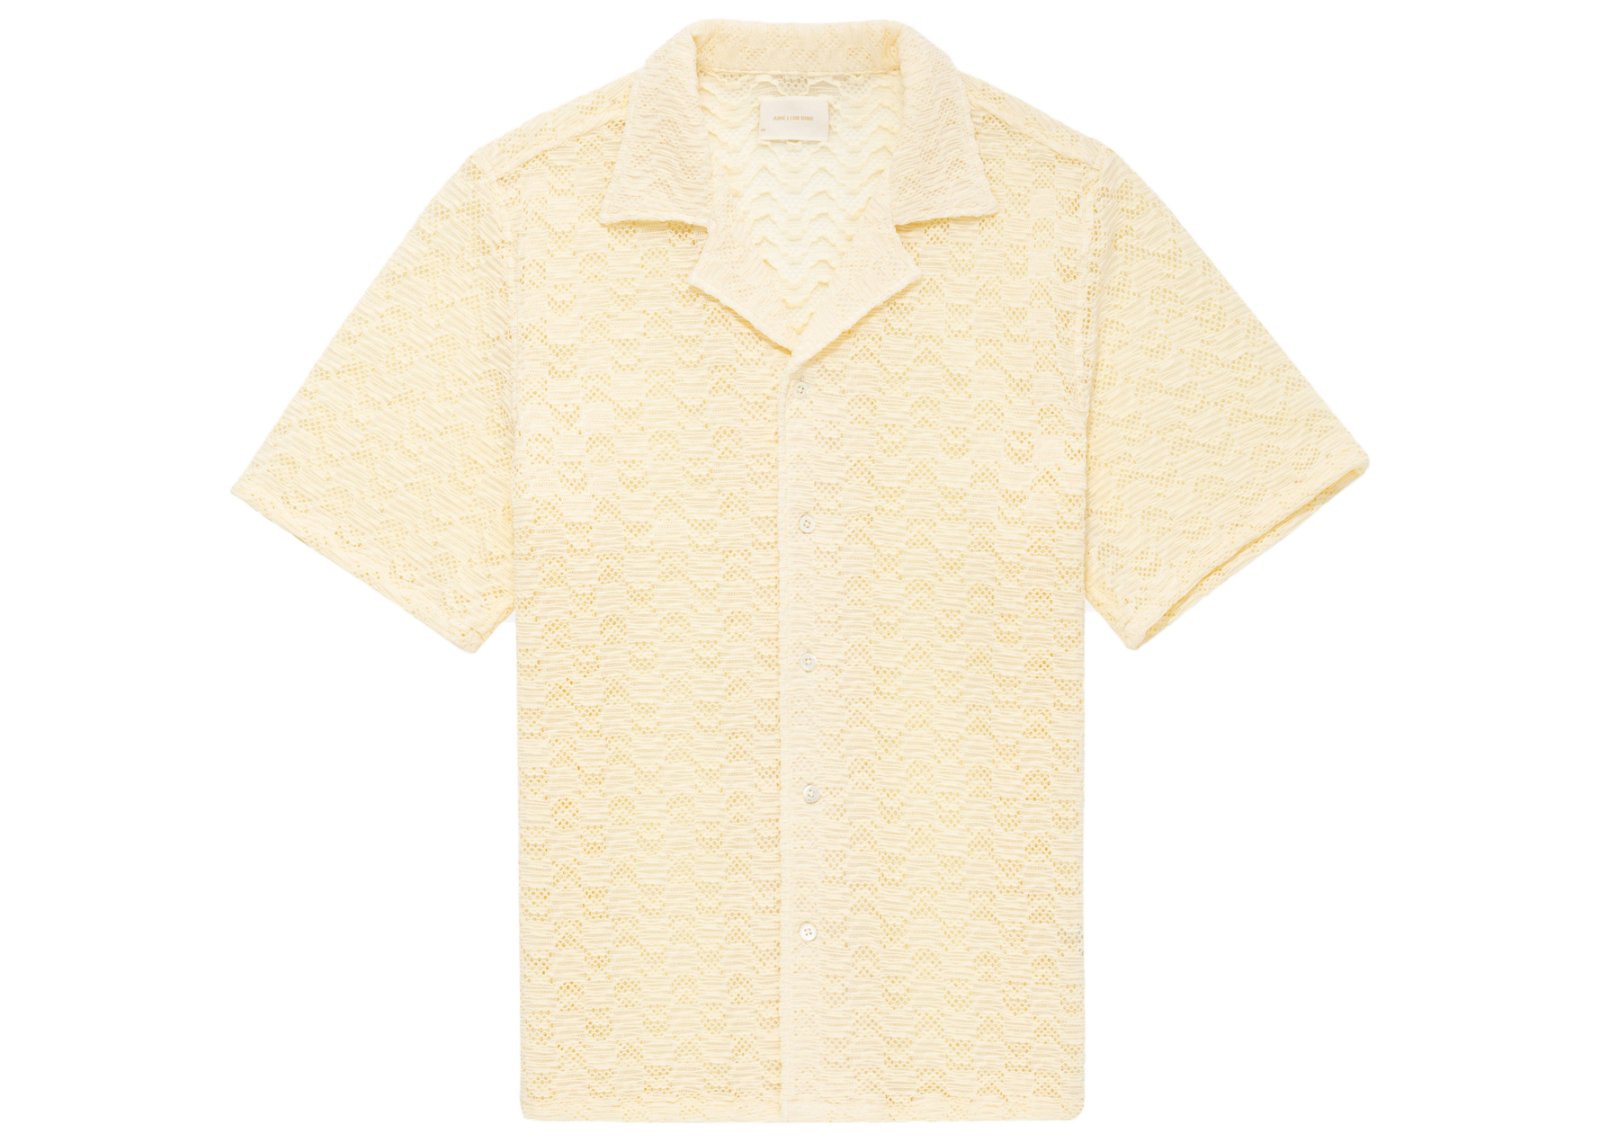 TimeToCop - Aime Leon Dore Rico Shirt Yellow info - Resellers